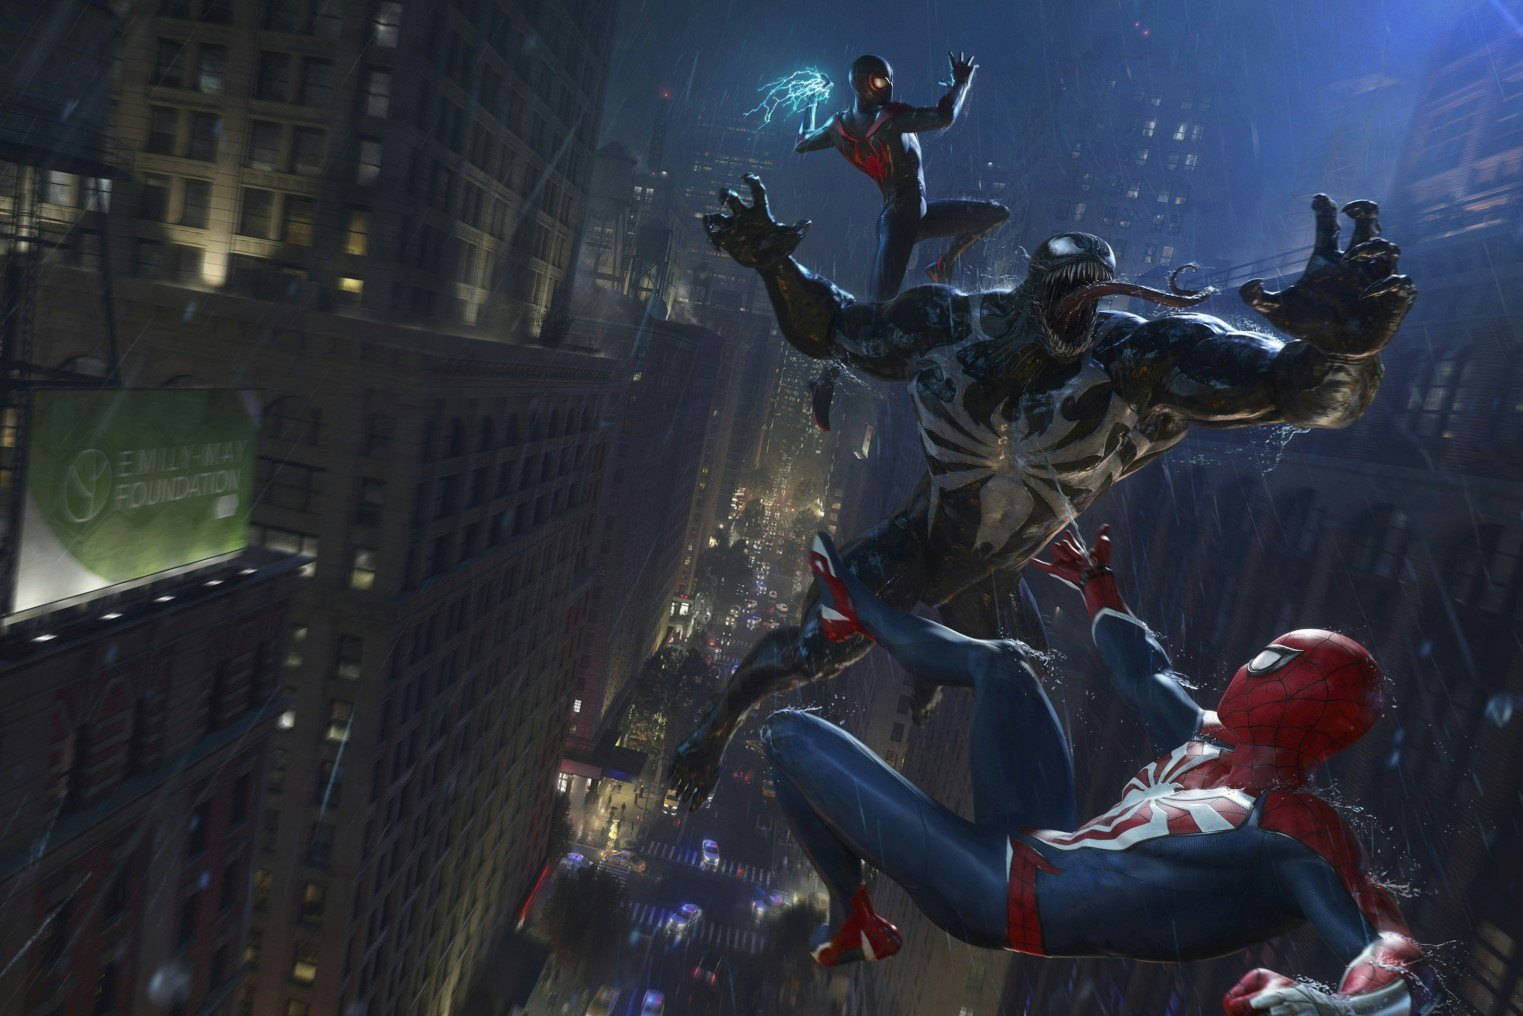 PlayStation Showcase: Spider-Man 2 leads PS5's 2023 games lineup